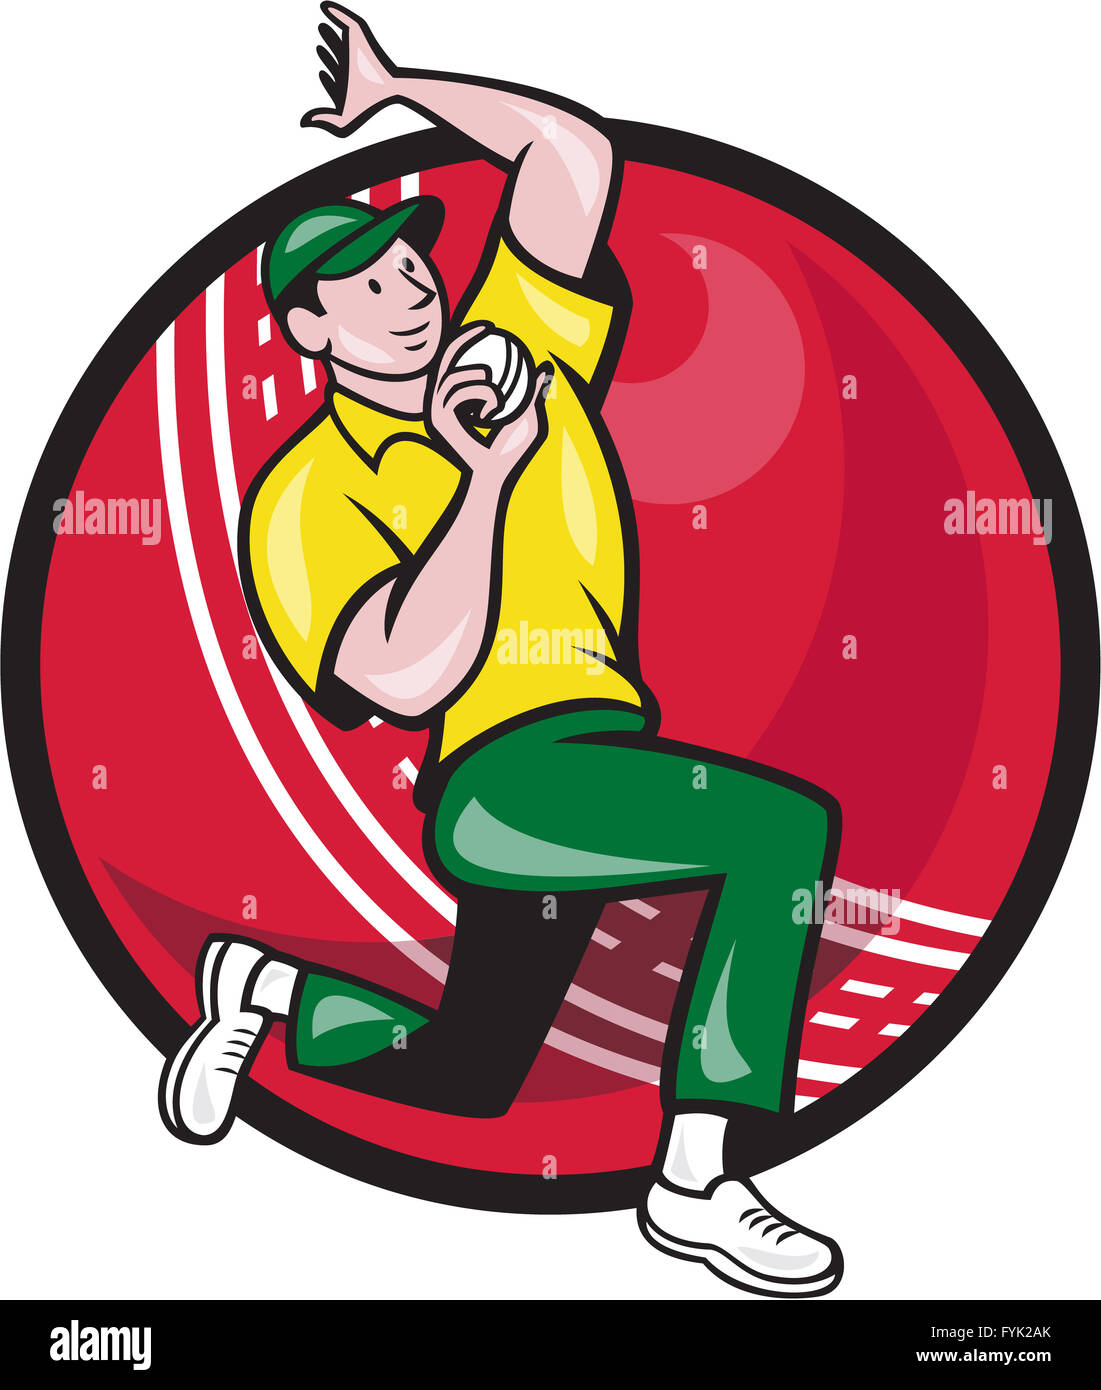 Cricket Fast Bowler Bowling Ball Side Stock Photo